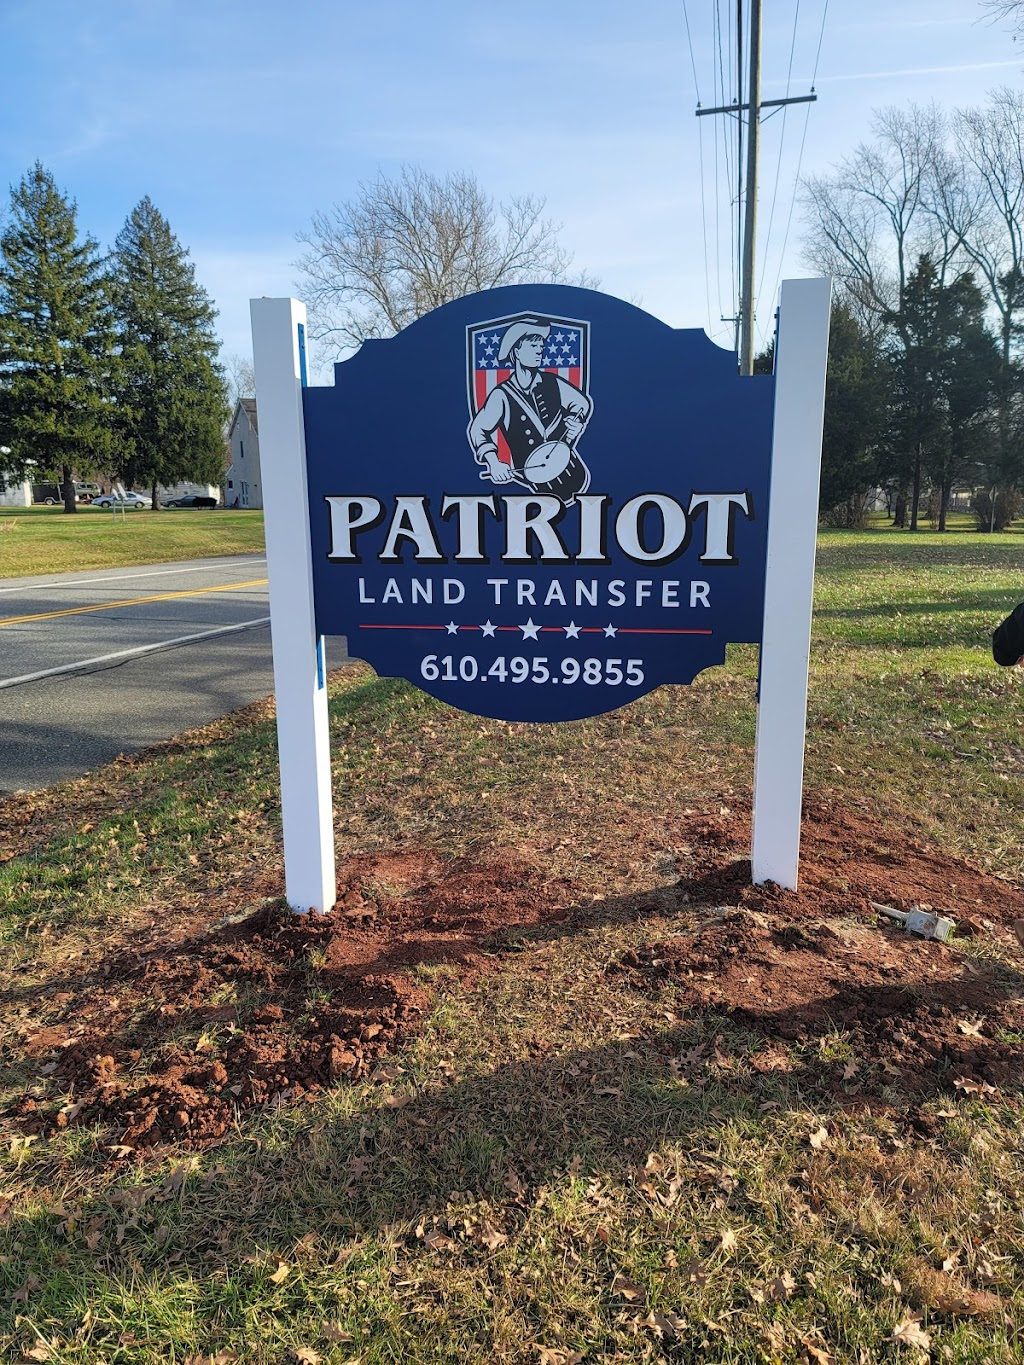 Patriot Land Transfer Inc | 408 W Linfield-Trappe Rd, Limerick, PA 19468 | Phone: (610) 495-9855